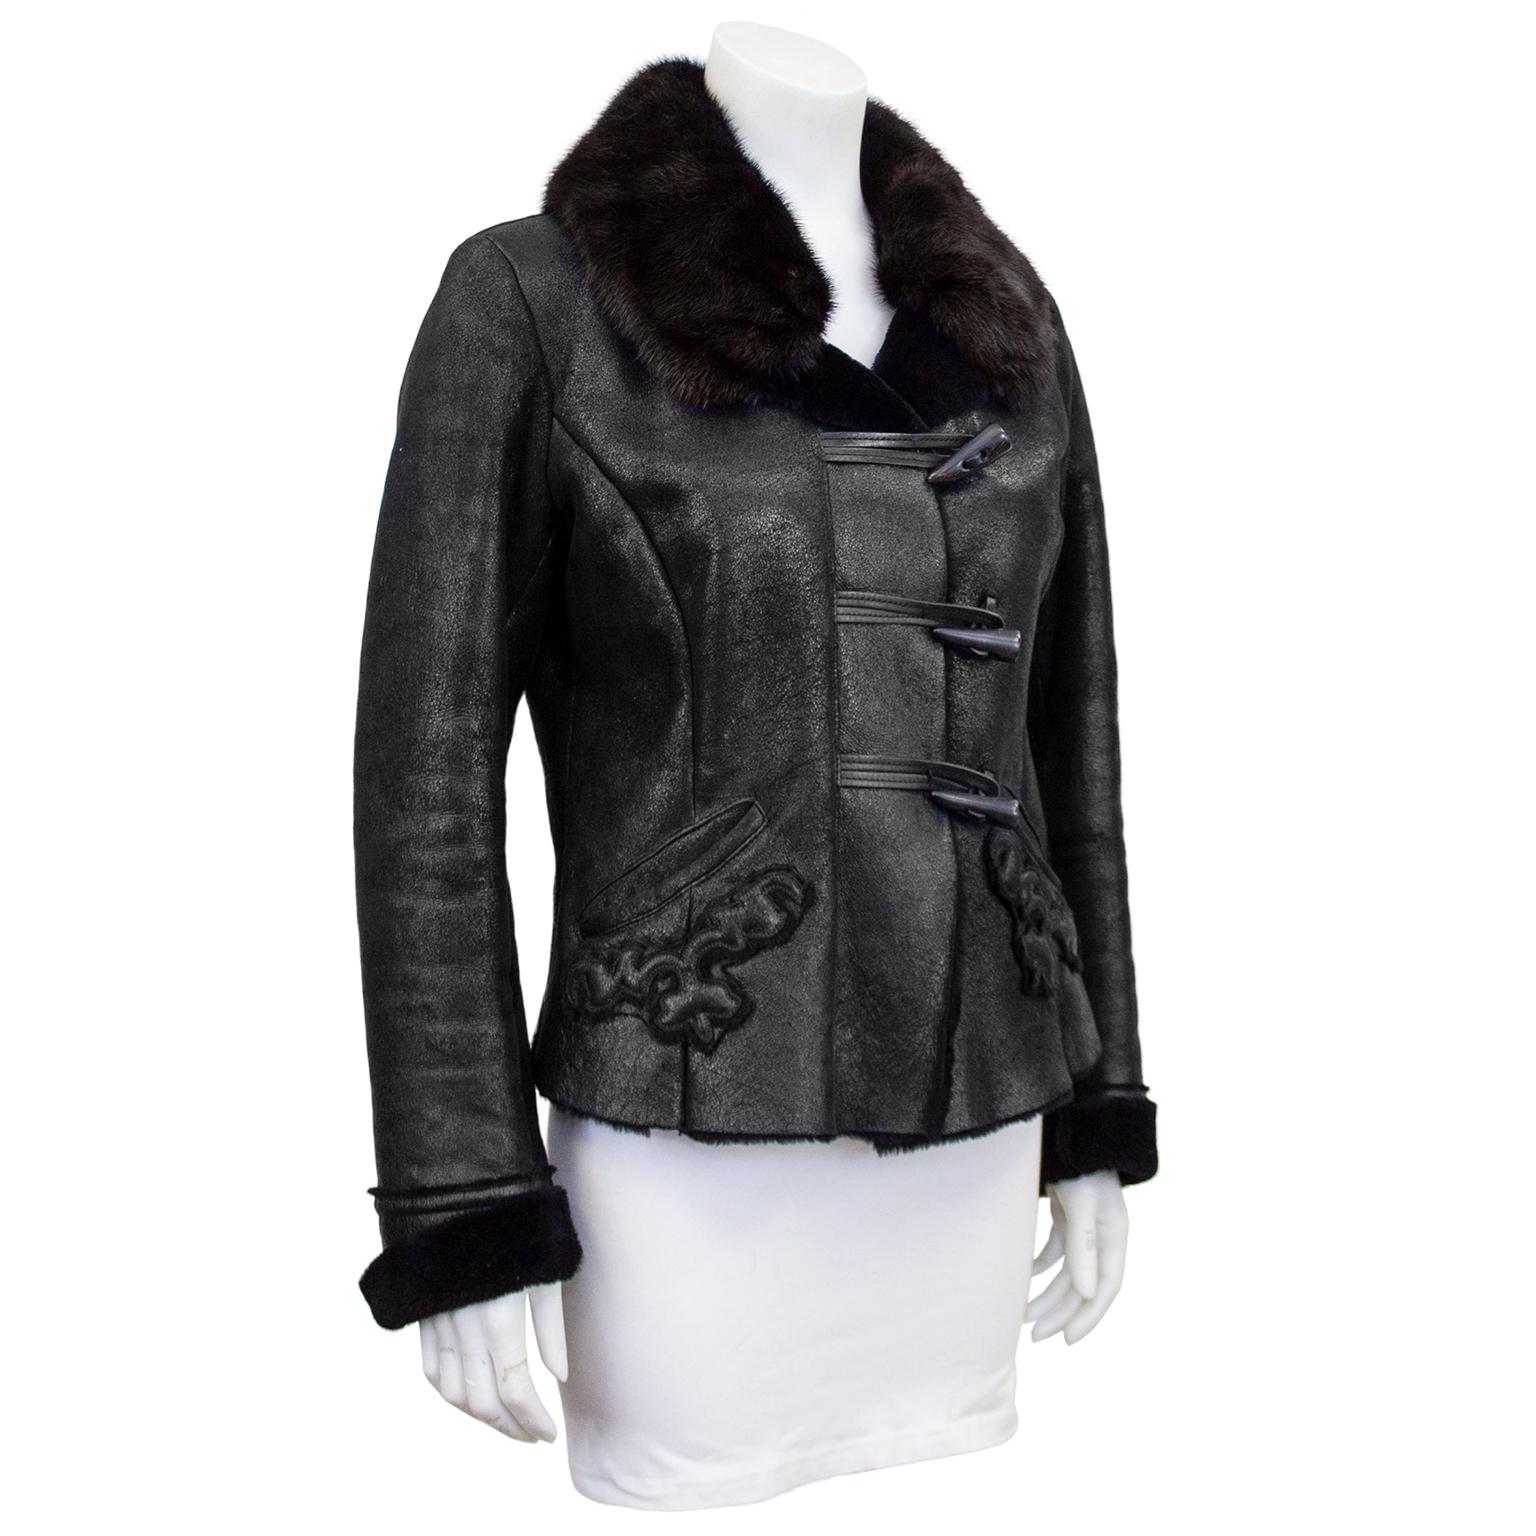 Stunning early 2000's black shearling Prada fitted cropped jacket with faux bone toggles up the front and  trapunto raised embroidered details on the front two angled pockets. Notched luxurious collar, deep black long hair shearling. In excellent